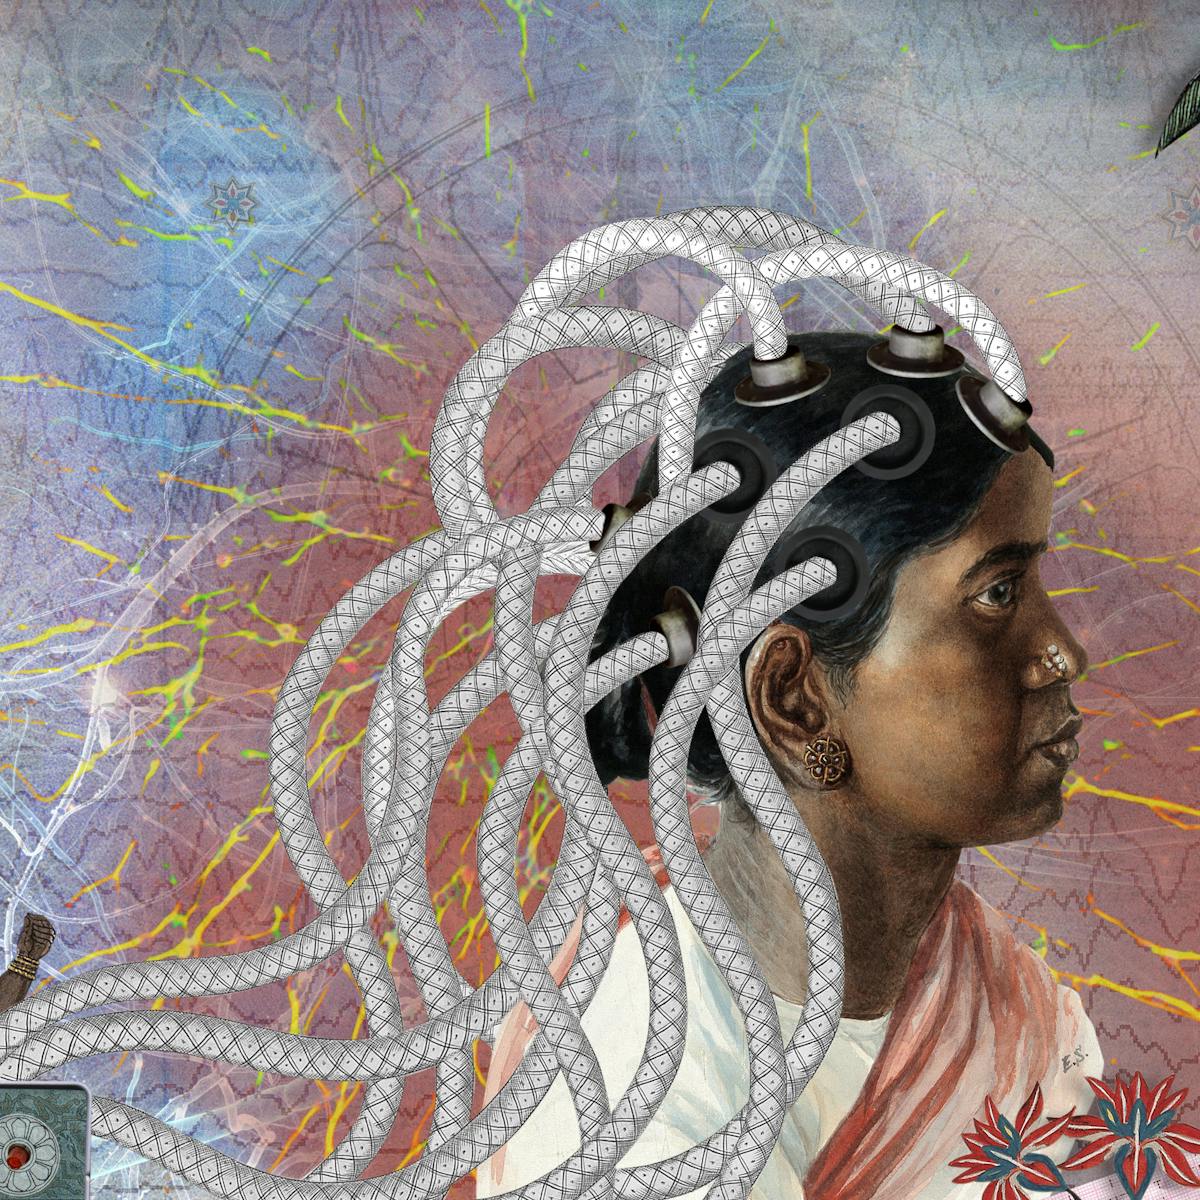 Illustration using collage techniques. Image shows a scene made up of mainly red and blue hues. To the right of centre is woman's head in profile, looking to the right. On her head are multiple electrode points with long tentacle like cords reach out and winding down to a small machine with dials on the front. To the far left of the image stands a young woman in a nursing uniform holding the read out from an EEG machine. In the background are floral and palm leave motifs.